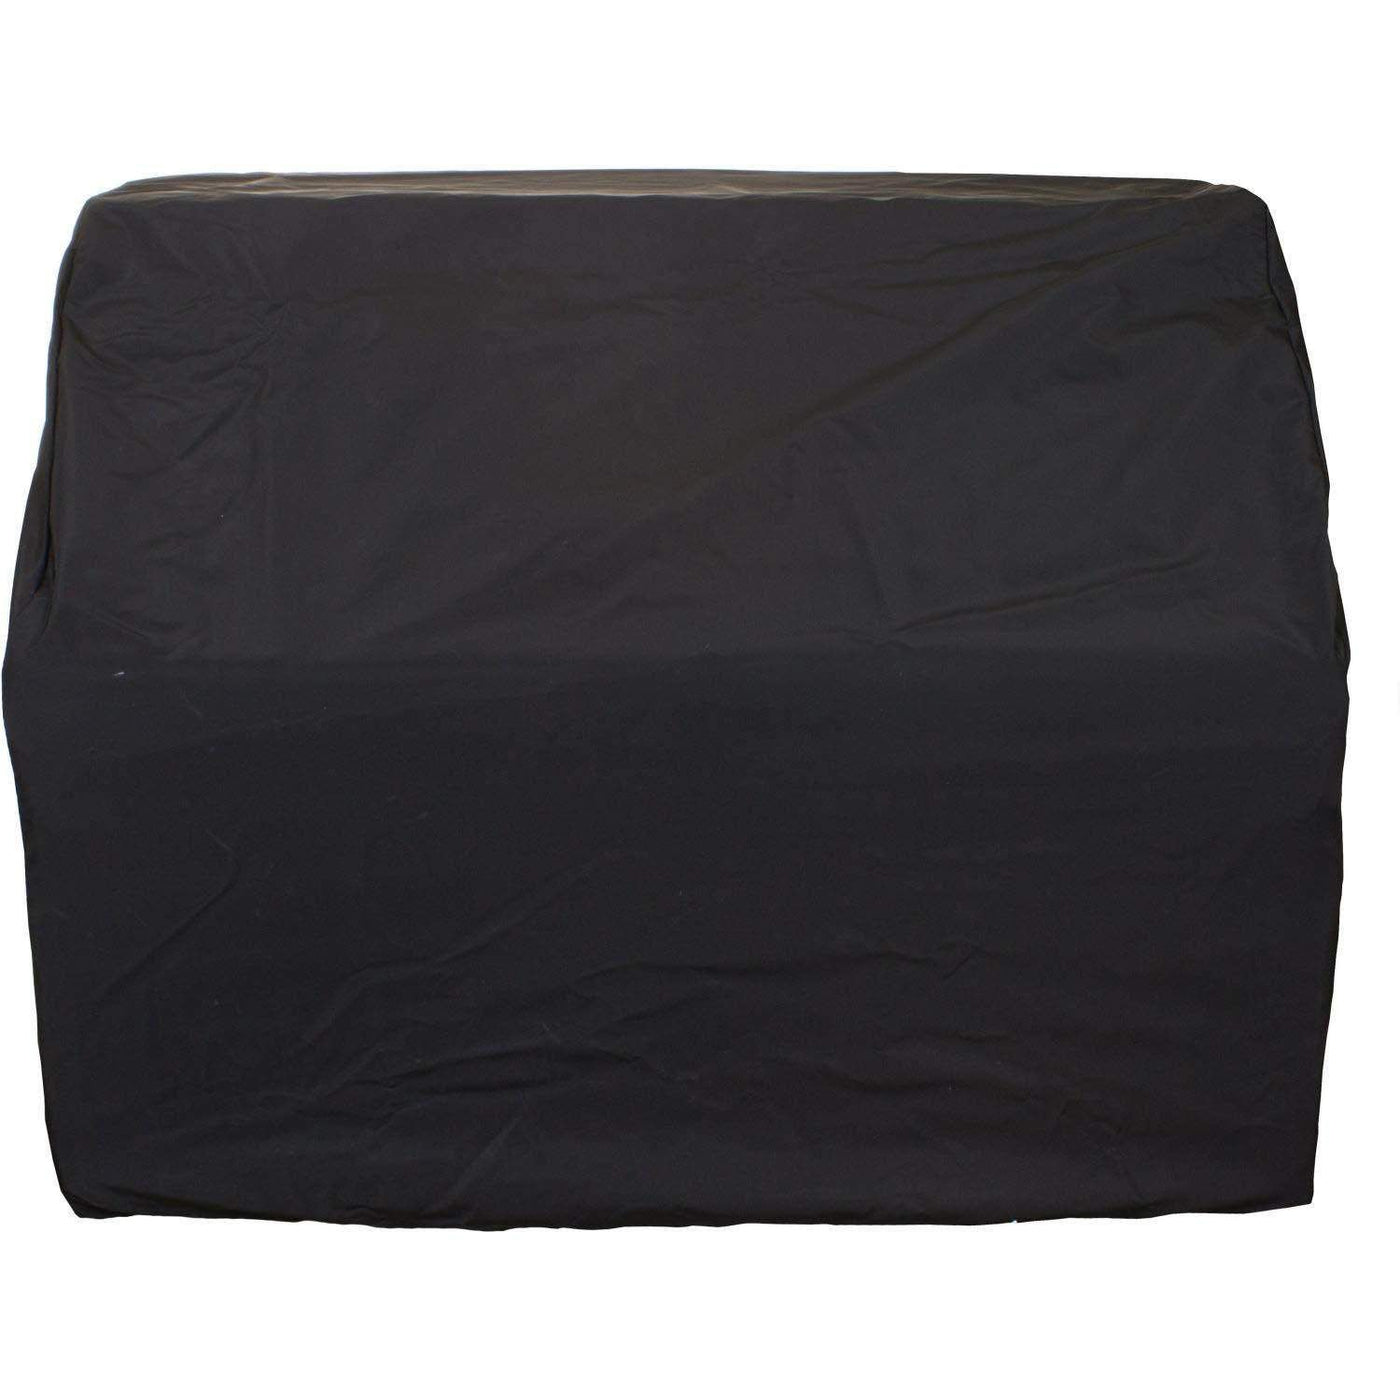 American Outdoor Grill Built-In 30-Inch Grill Cover